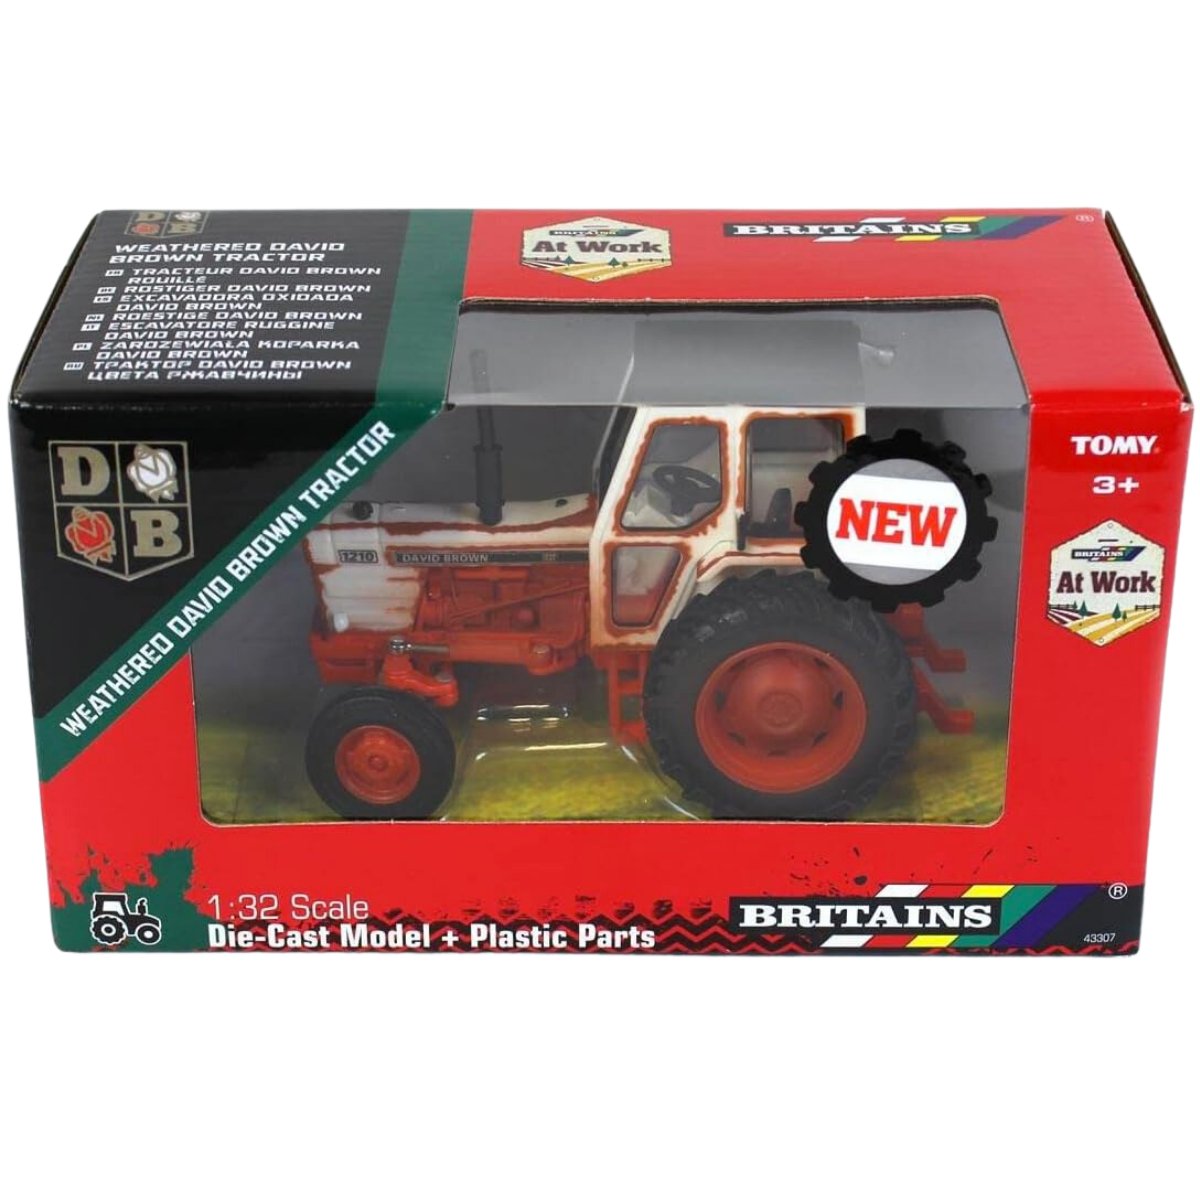 Britains Weathered David Brown Tractor - 1:32 Scale - Phillips Hobbies